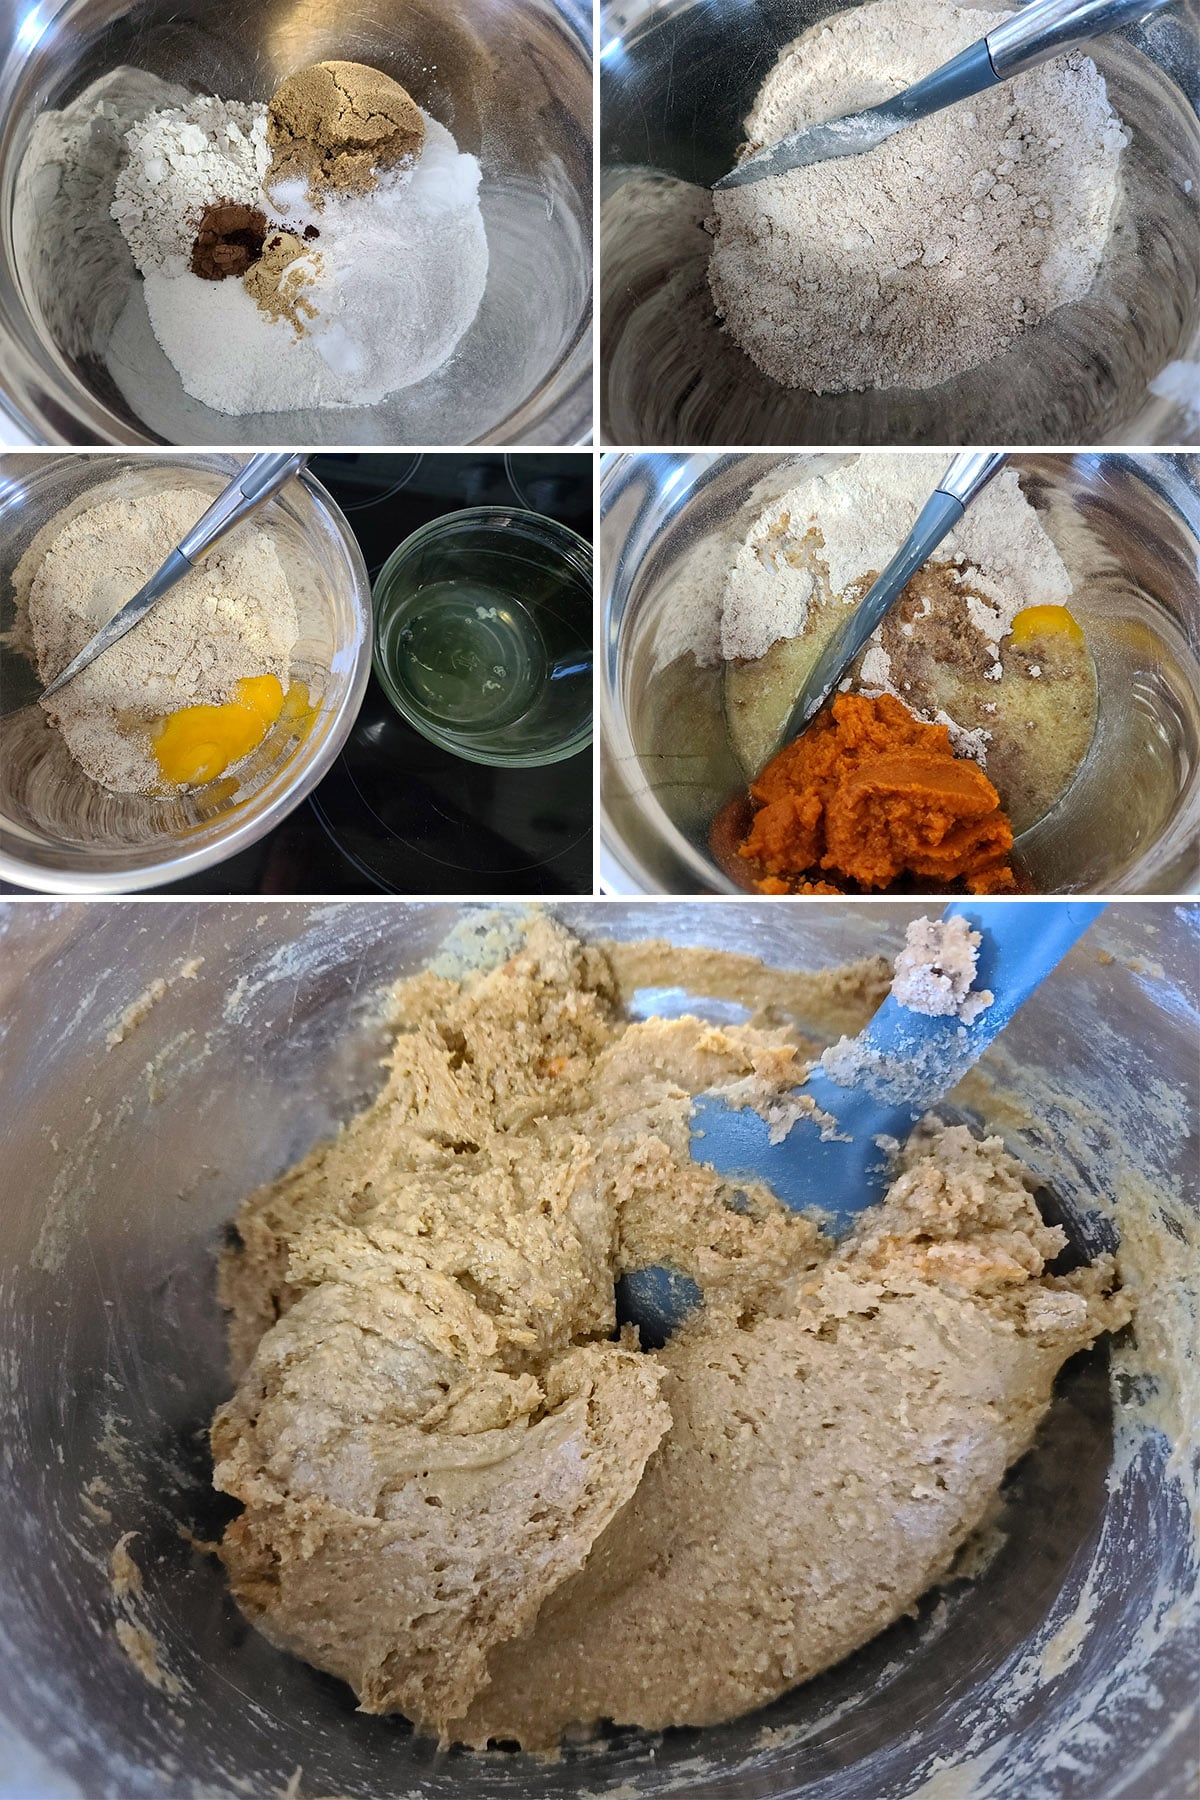 A 5 part image shownig the dry ingredients and wet ingredients mixed, separately and together.